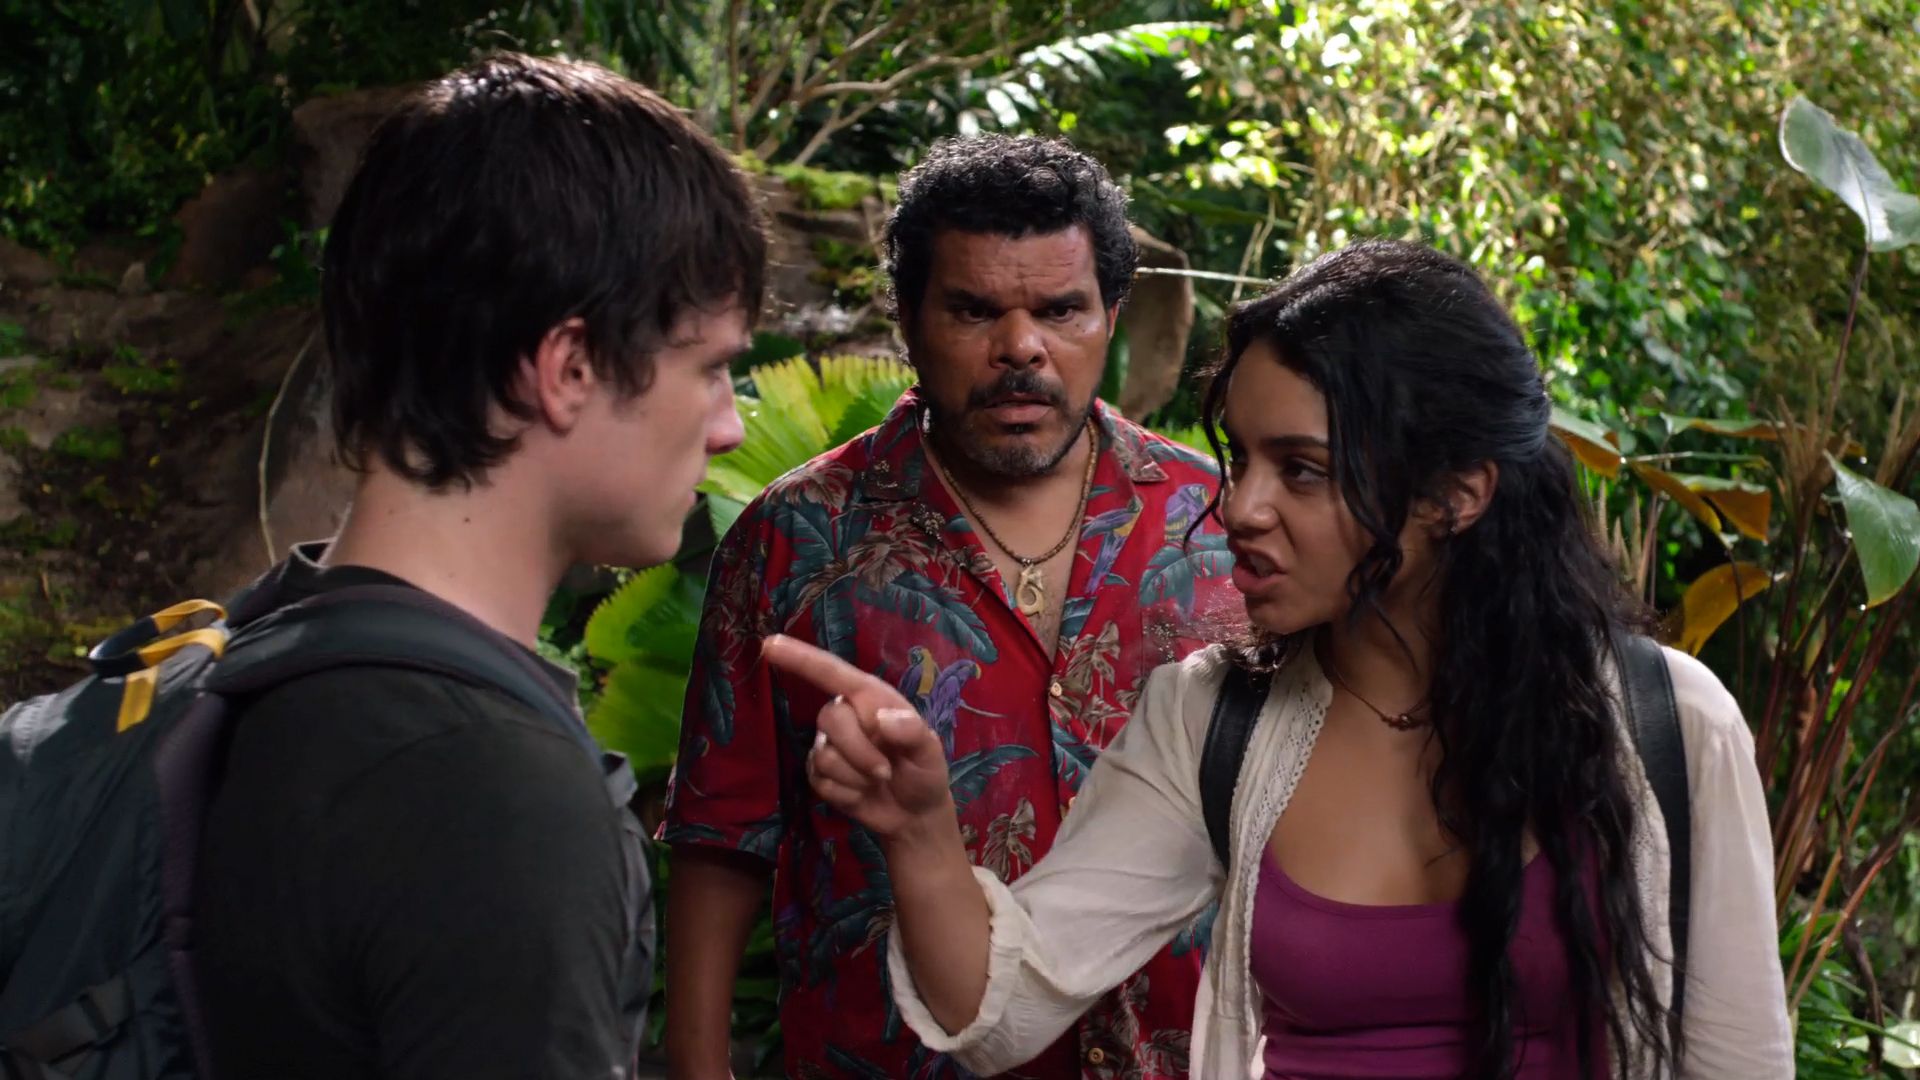 Josh Hutcherson, Luis Guzman, and Vanessa Hudgens on the set of Journey 2: The Mysterious Island{98} Very similar, a very similar audience. Families with maybe ten, nine year olds and up, I'd say. What's cool about these movies is that there is some humor in there that I think older people will find funny, too. So, it's not more like another animated movie where you take your kids to it. I think that adults will actually enjoy it as well.